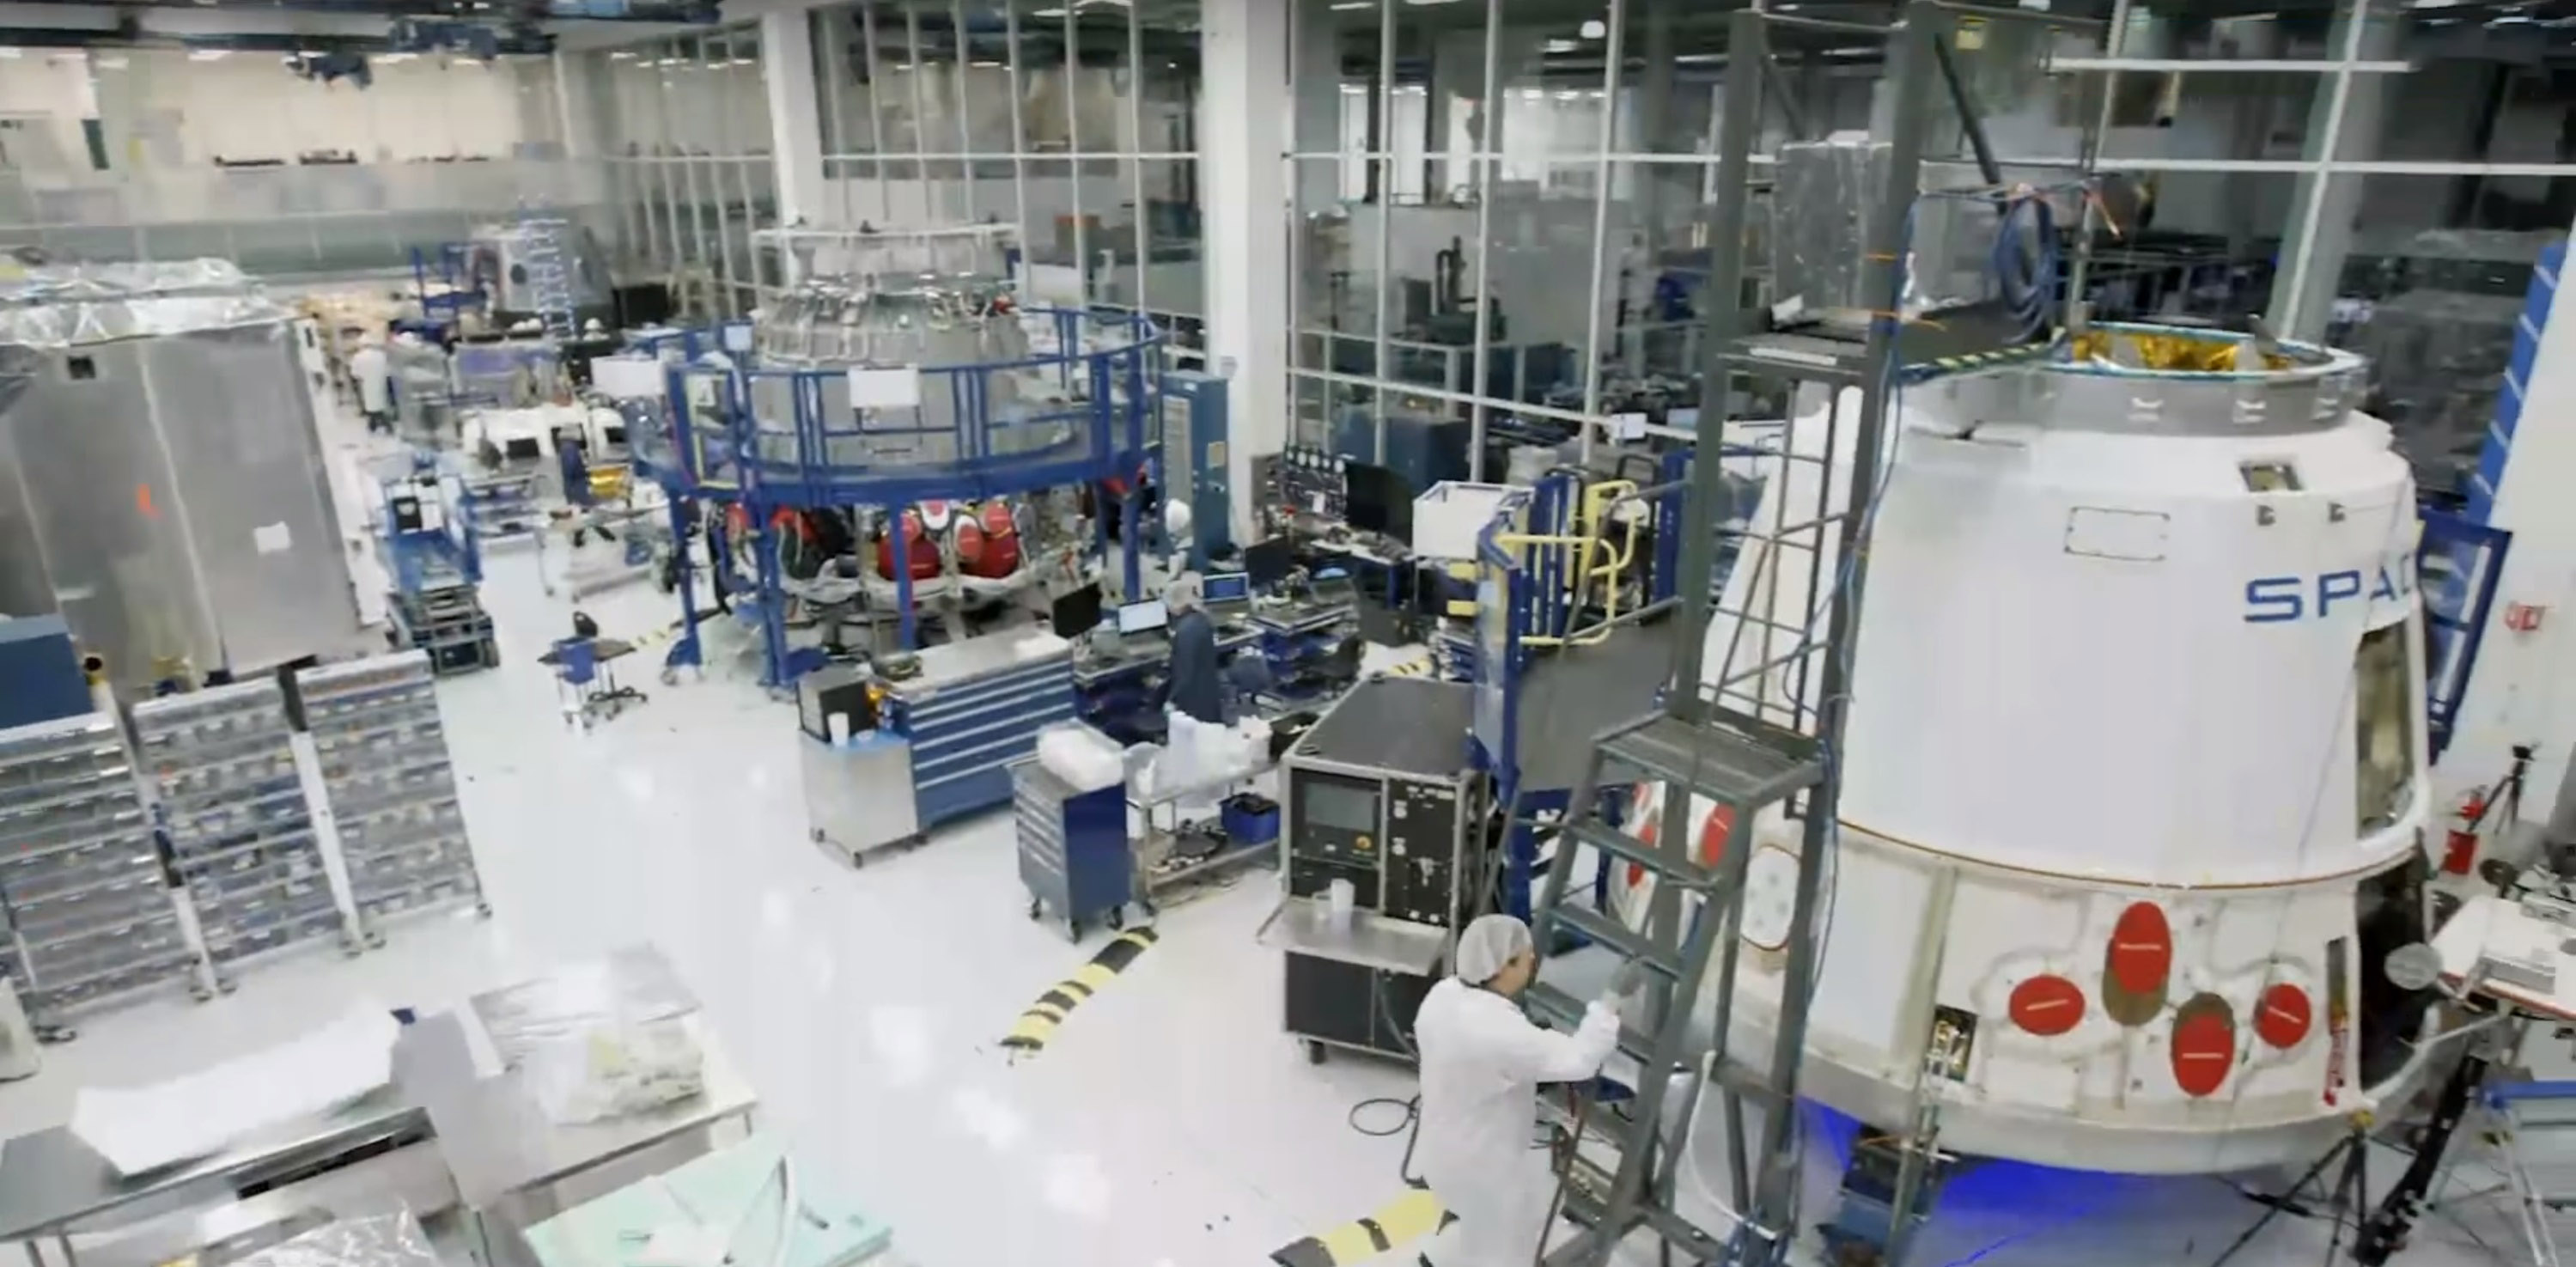 Dragon processing (SpaceX)